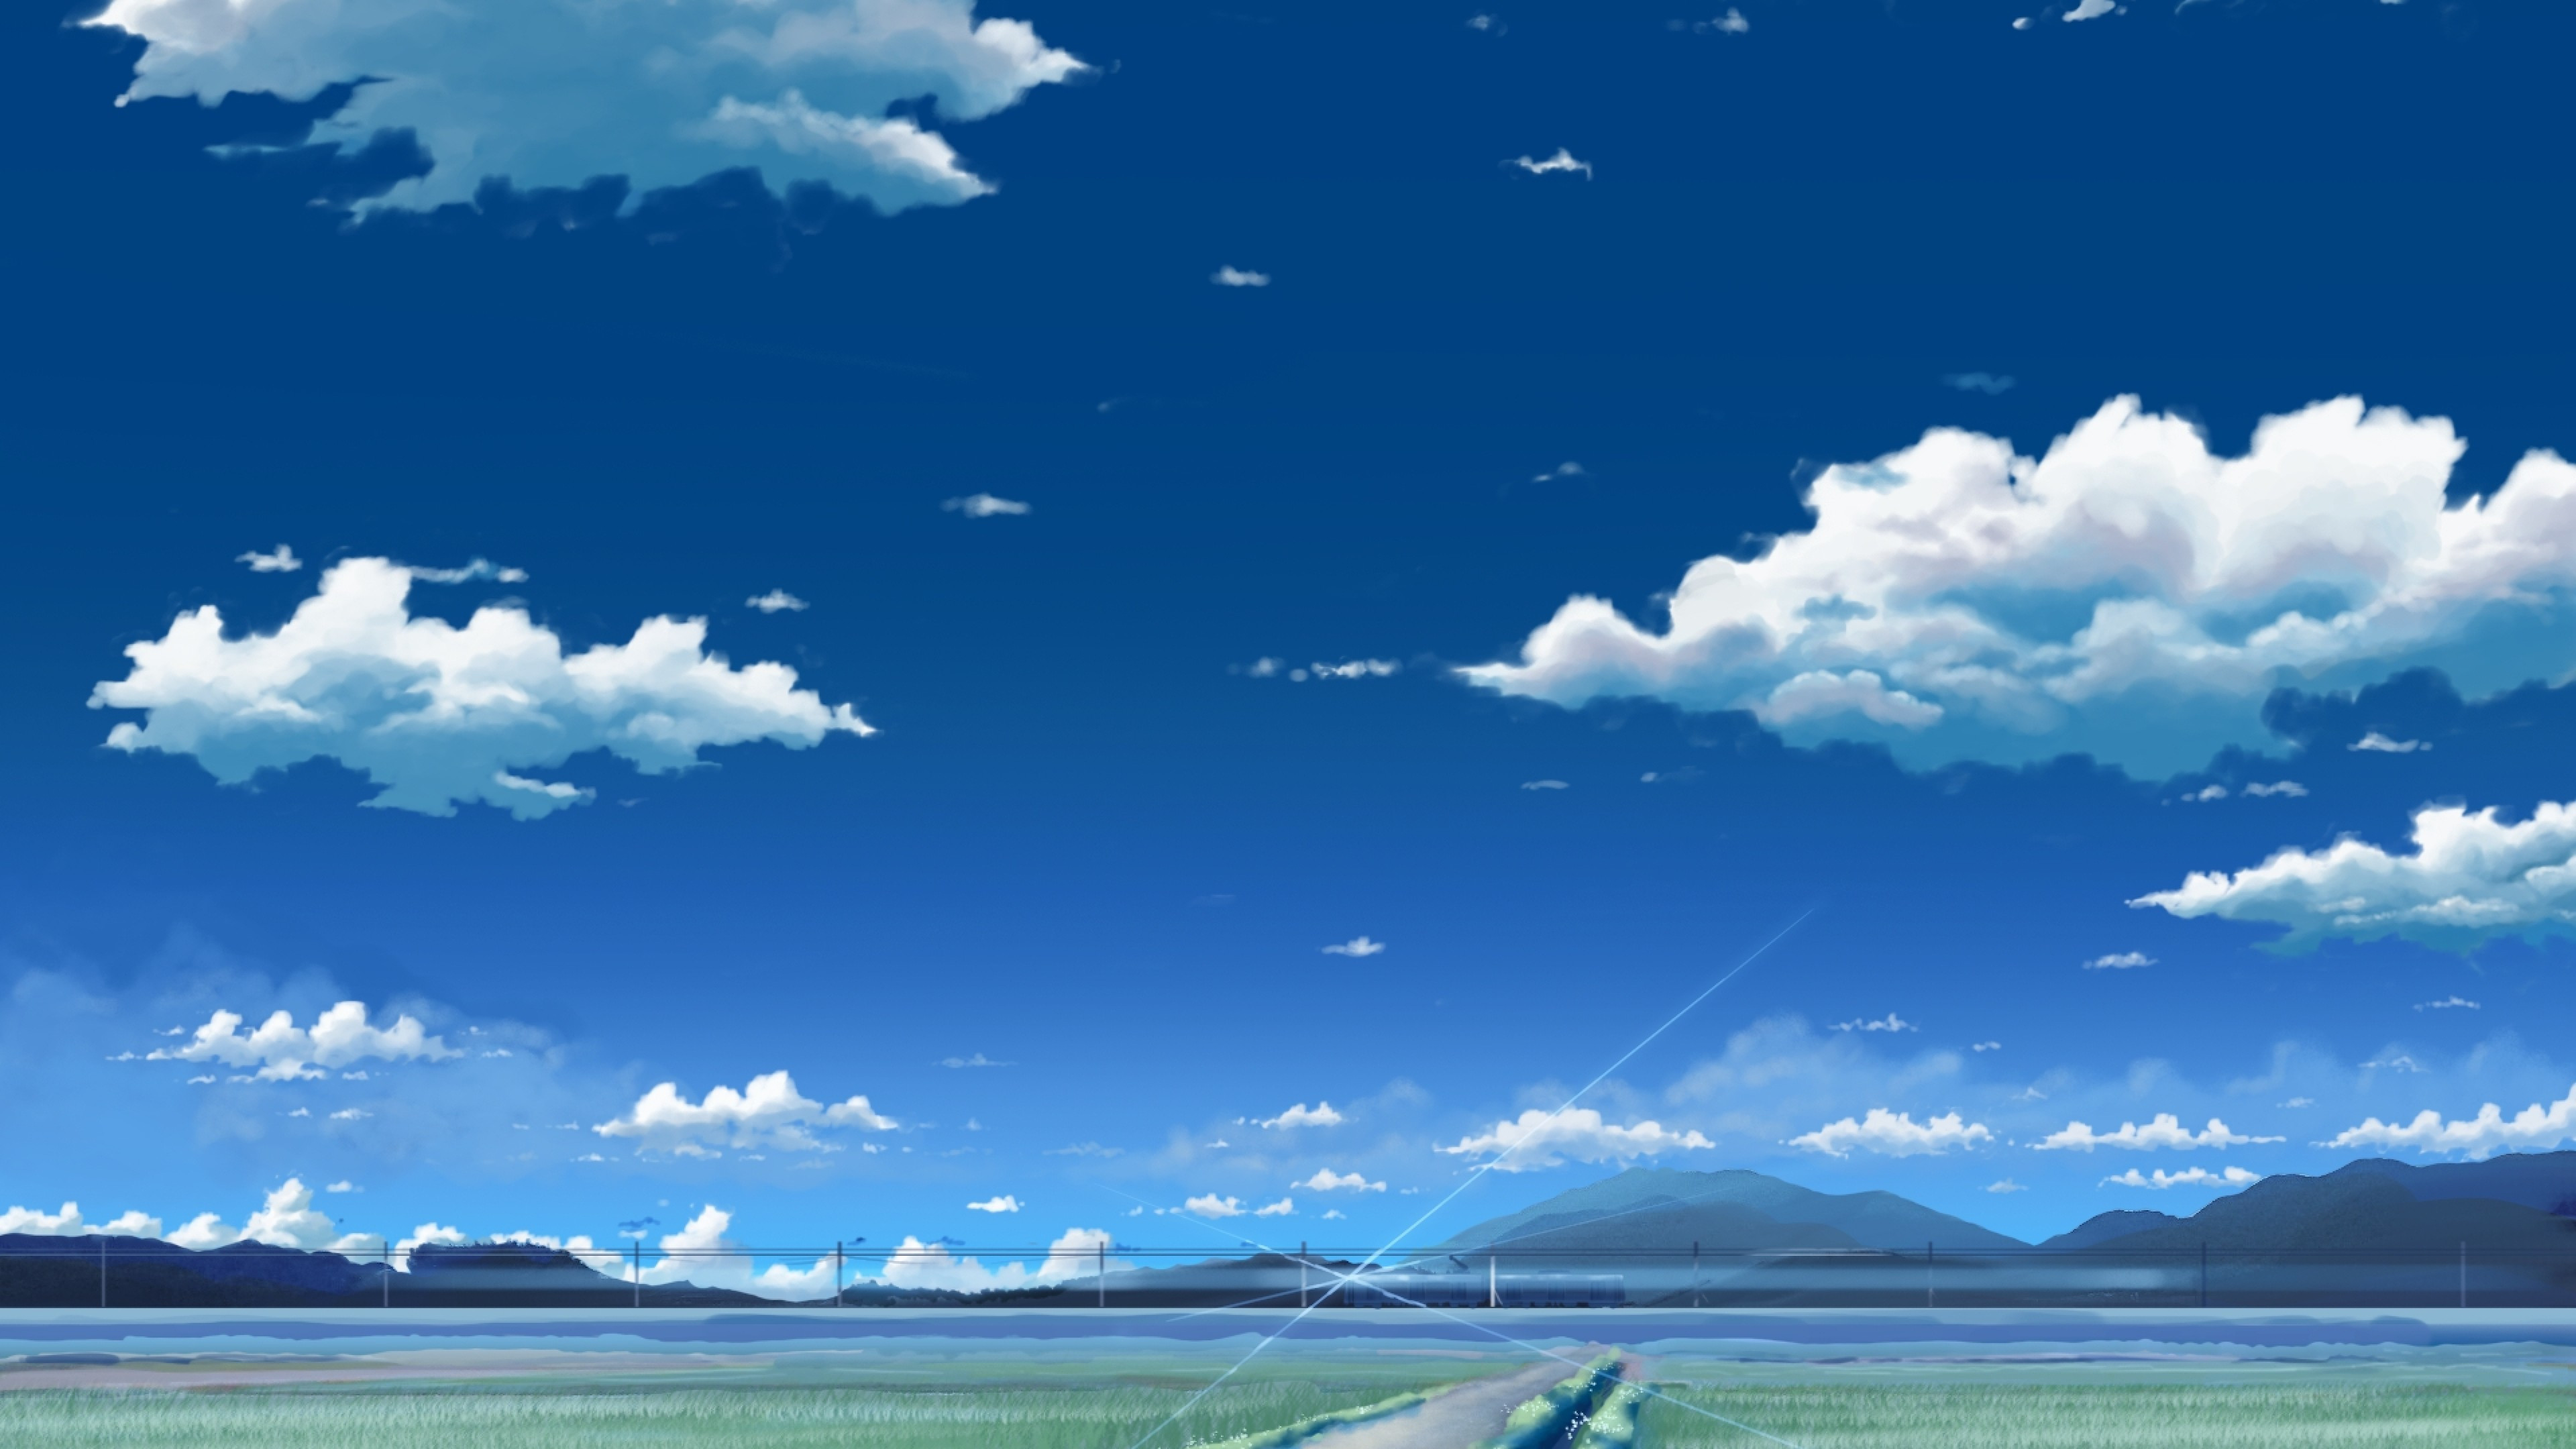 Download 3840x2160 Anime Landscape, Scenic, Field, Sky, Clouds, Path, Mountains Wallpaper for UHD TV